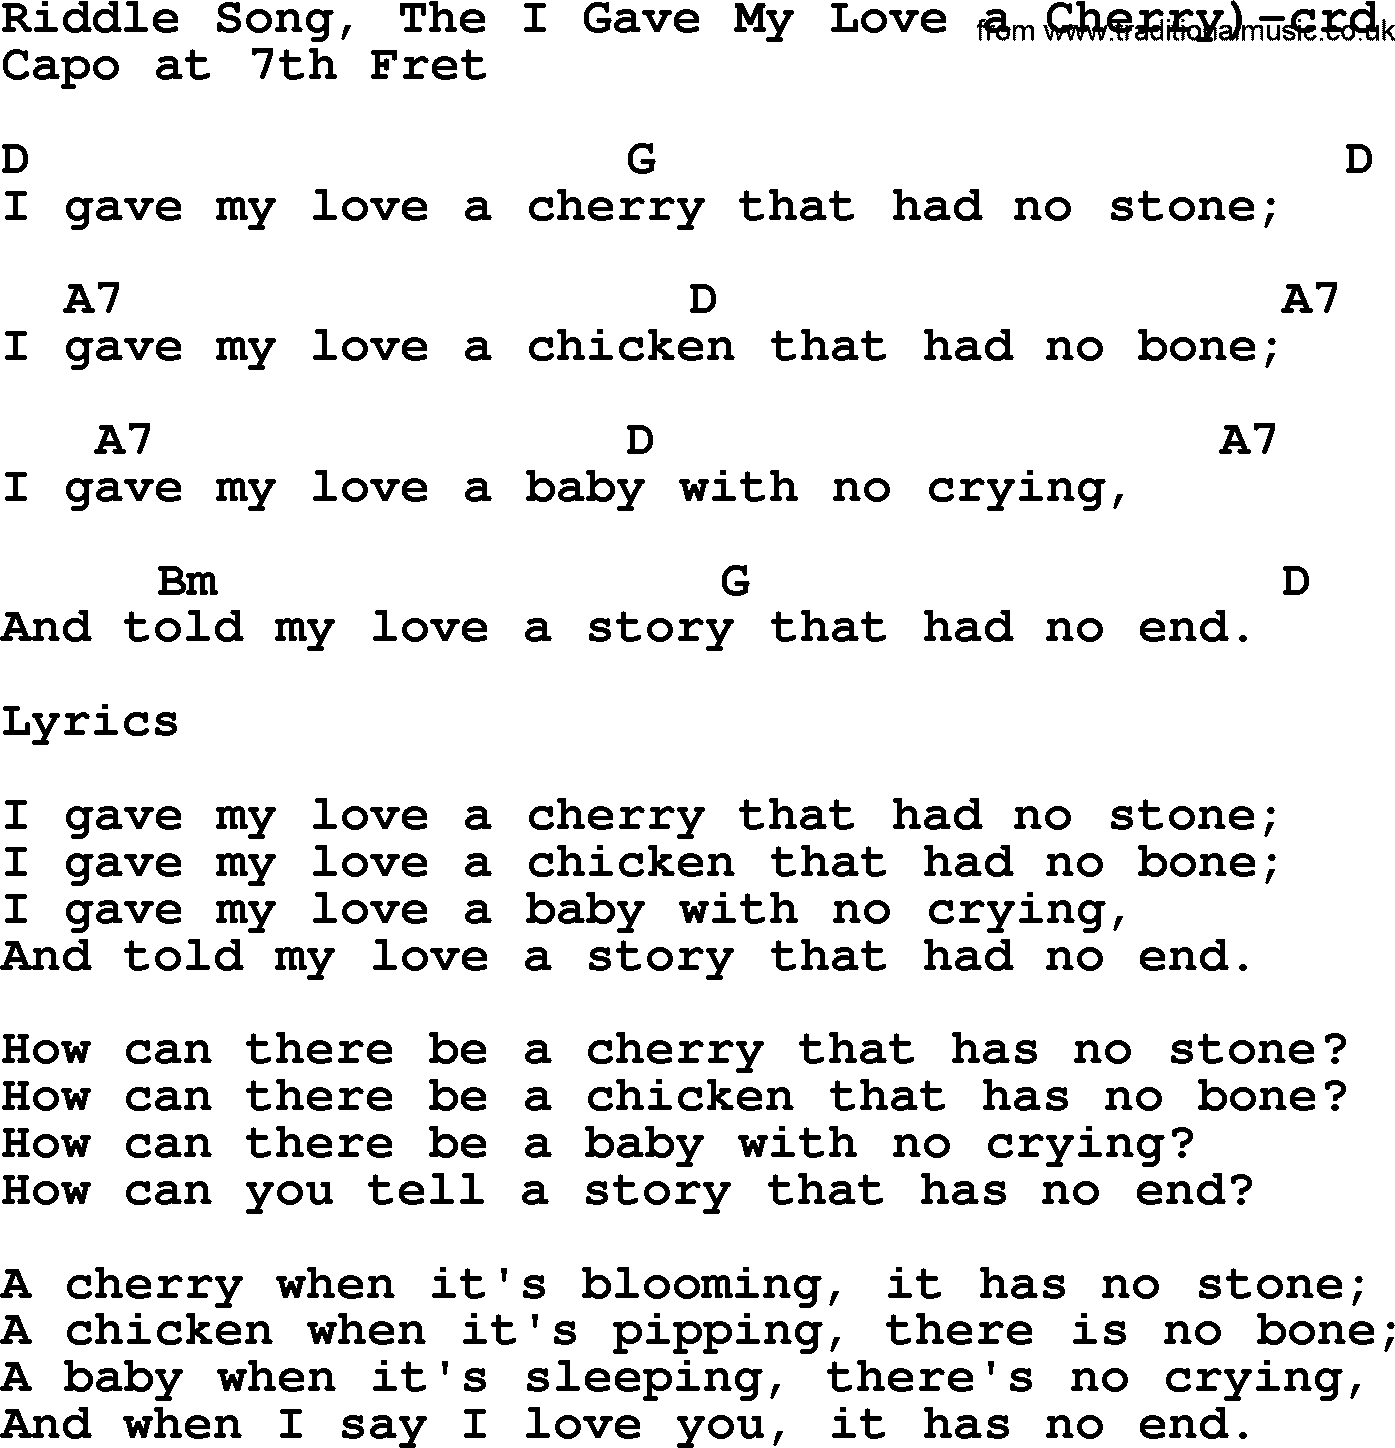 Joan Baez song Riddle Song, The I Gave My Love A Cherry lyrics and chords